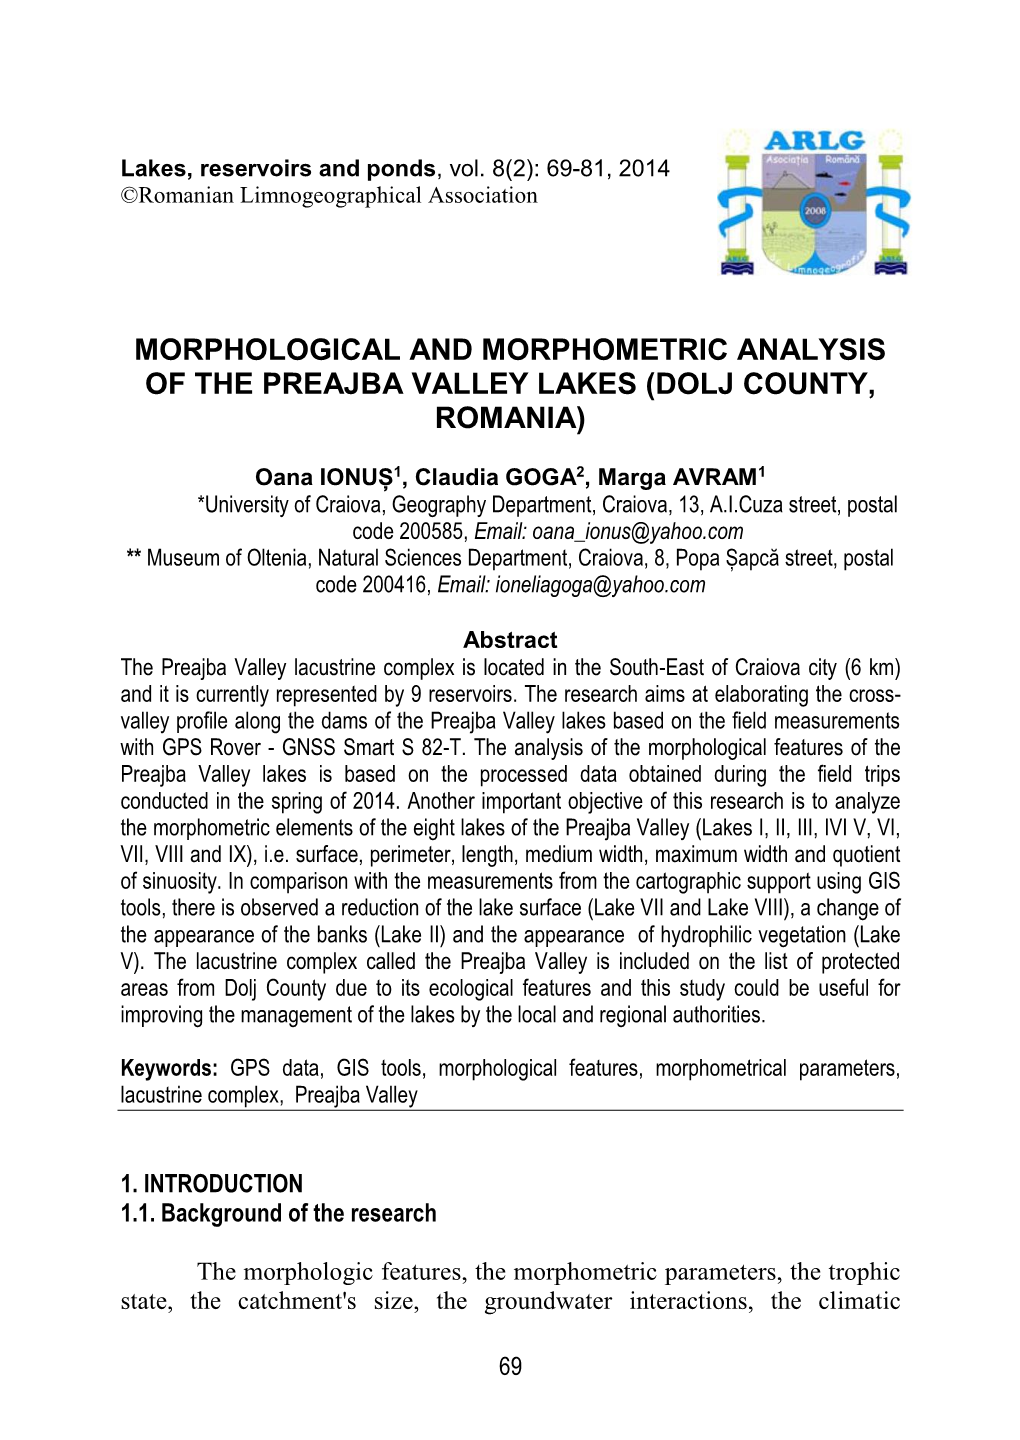 Morphological and Morphometric Analysis of the Preajba Valley Lakes (Dolj County, Romania)